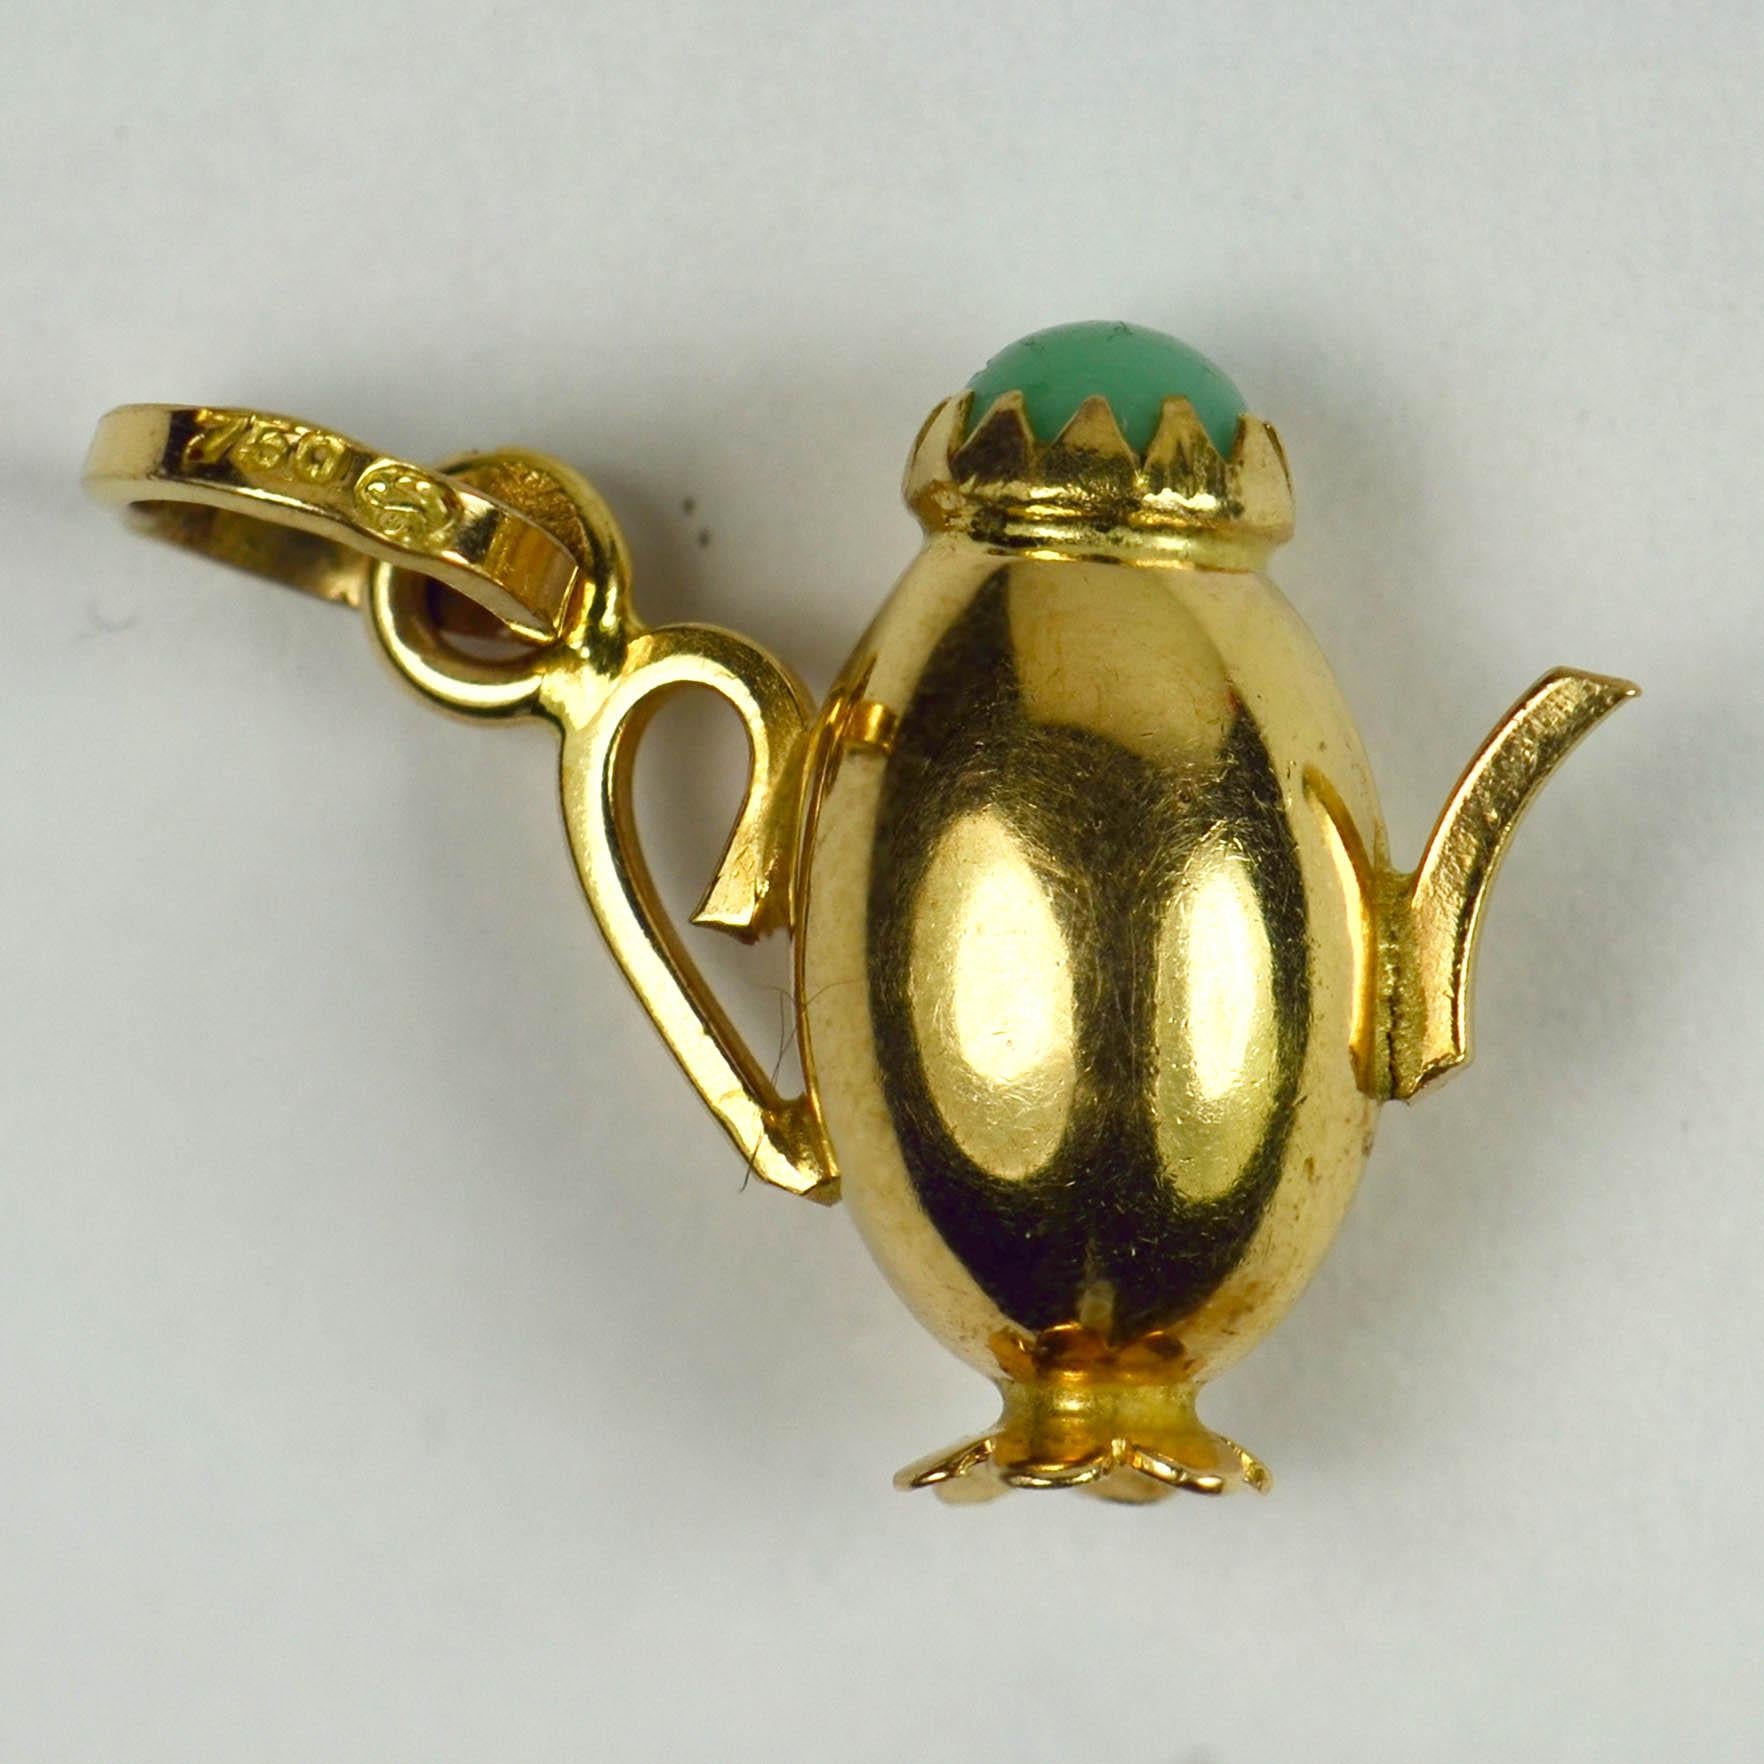 An 18 karat (18K) yellow gold charm pendant designed as a coffee pot with turquoise paste cap. Stamped with 750 and the French import mark for 18 karat gold between 1984-1994 along with an unknown maker's mark.

Dimensions: 1.7 x 2 x 0.9 cm
Weight: